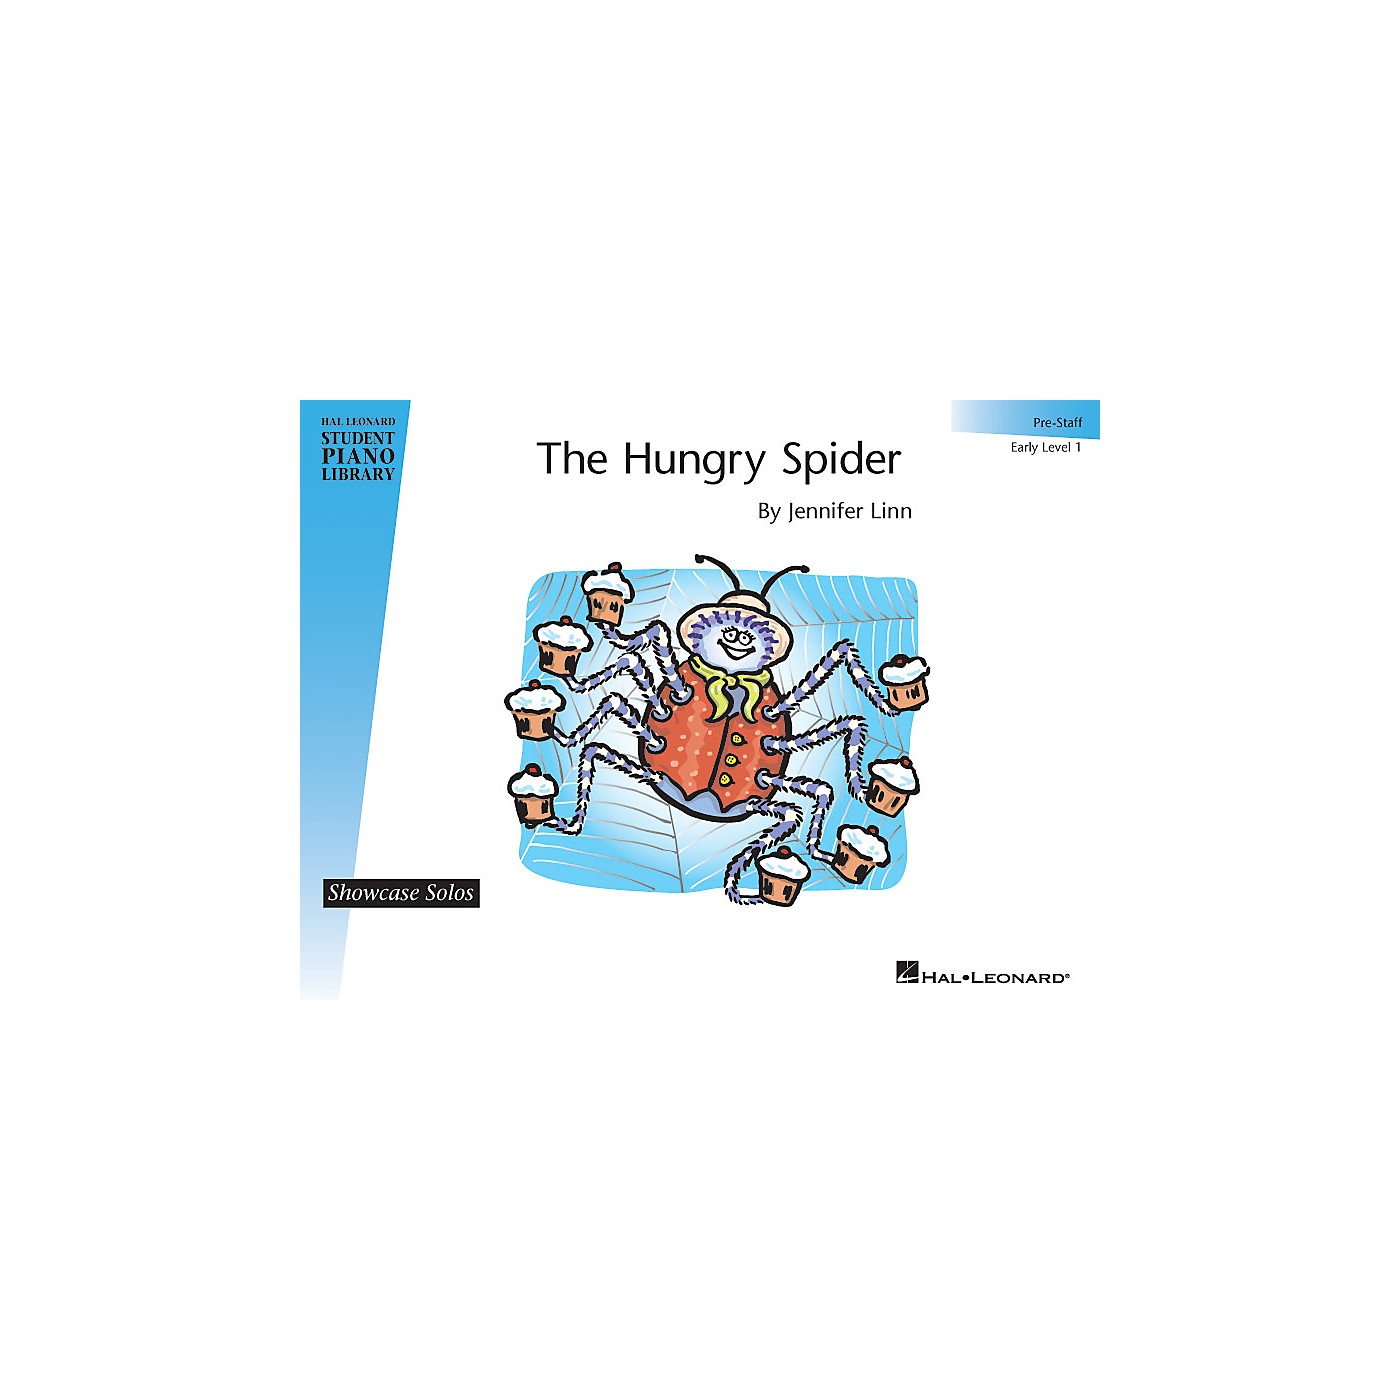 Hal Leonard The Hungry Spider Piano Library Series by Jennifer Linn (Level Early Elem (Pre-Staff)) thumbnail